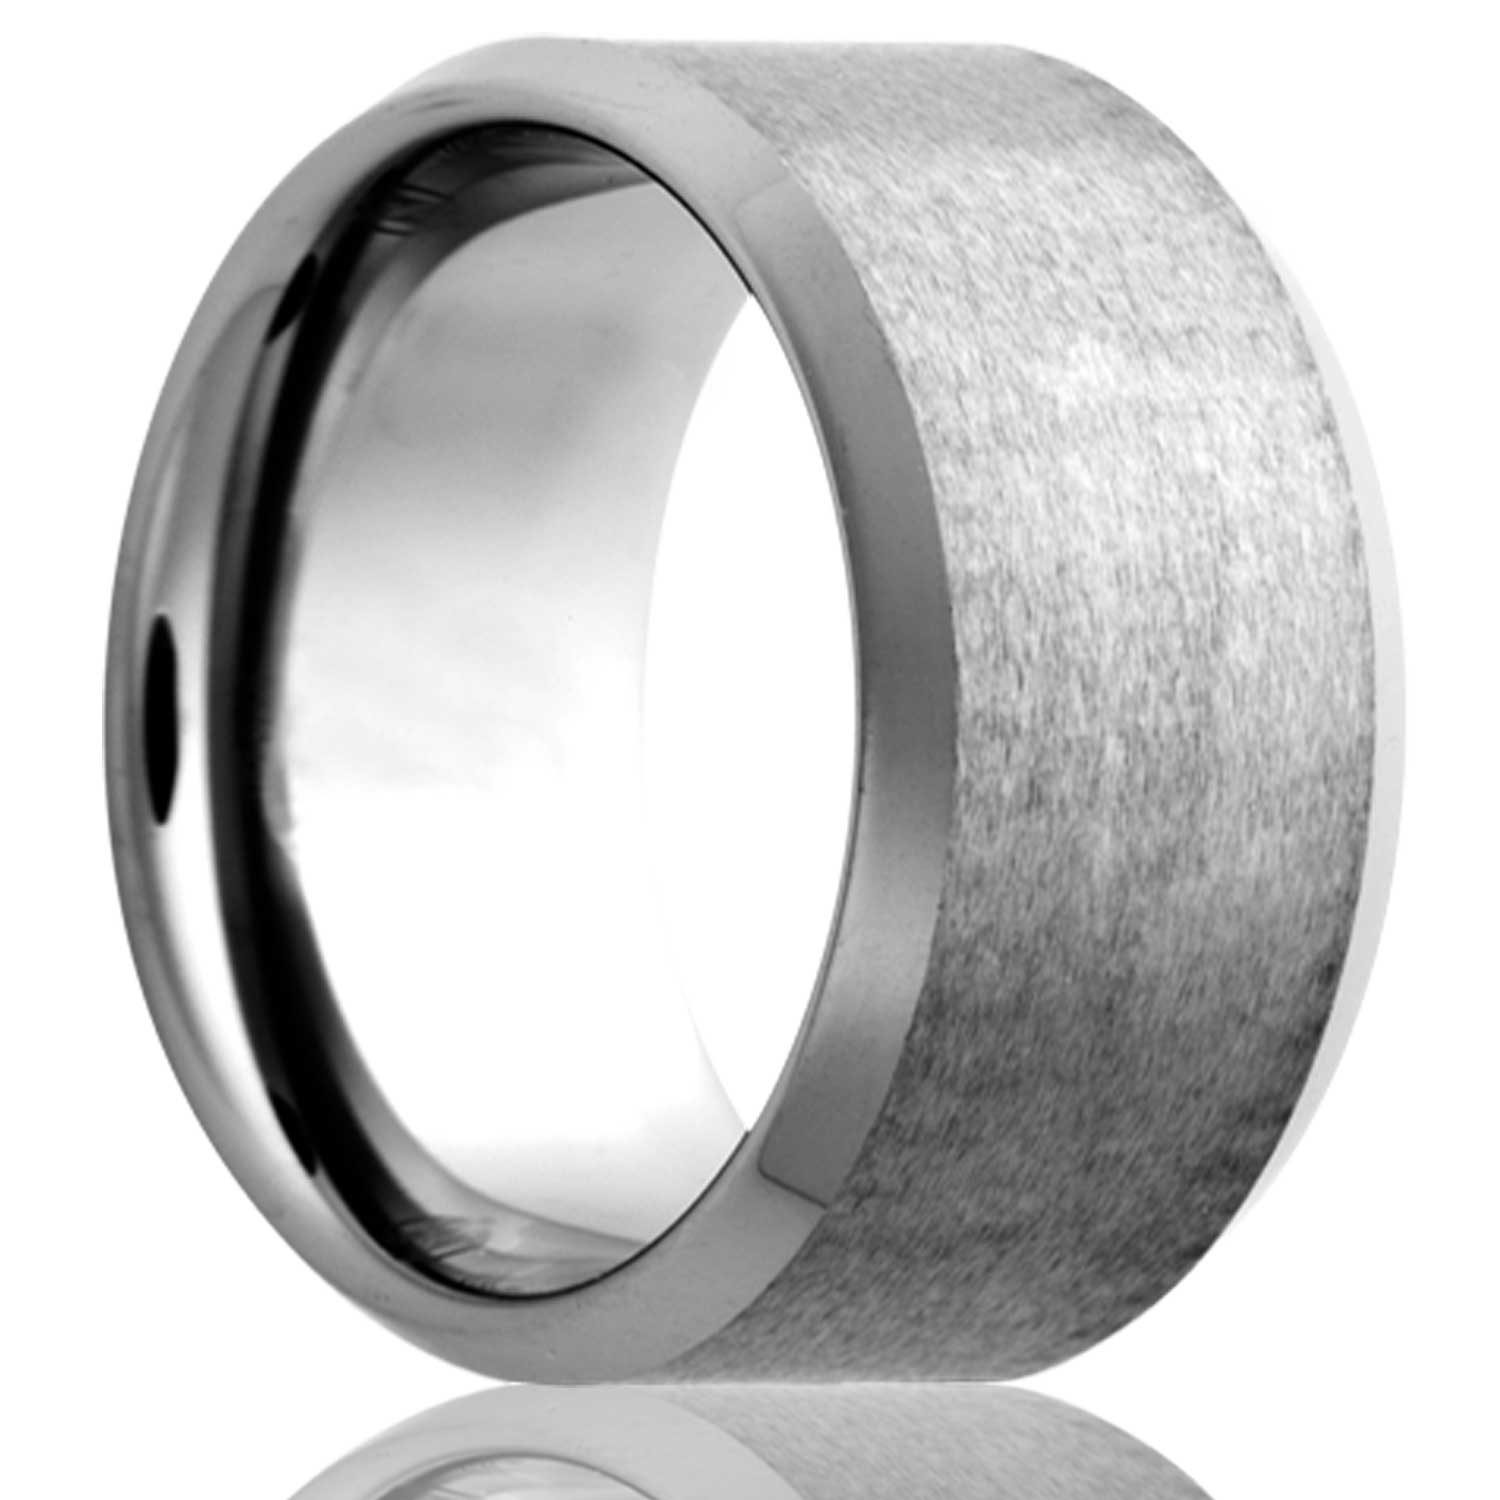 A satin finish cobalt wedding band with beveled edges displayed on a neutral white background.